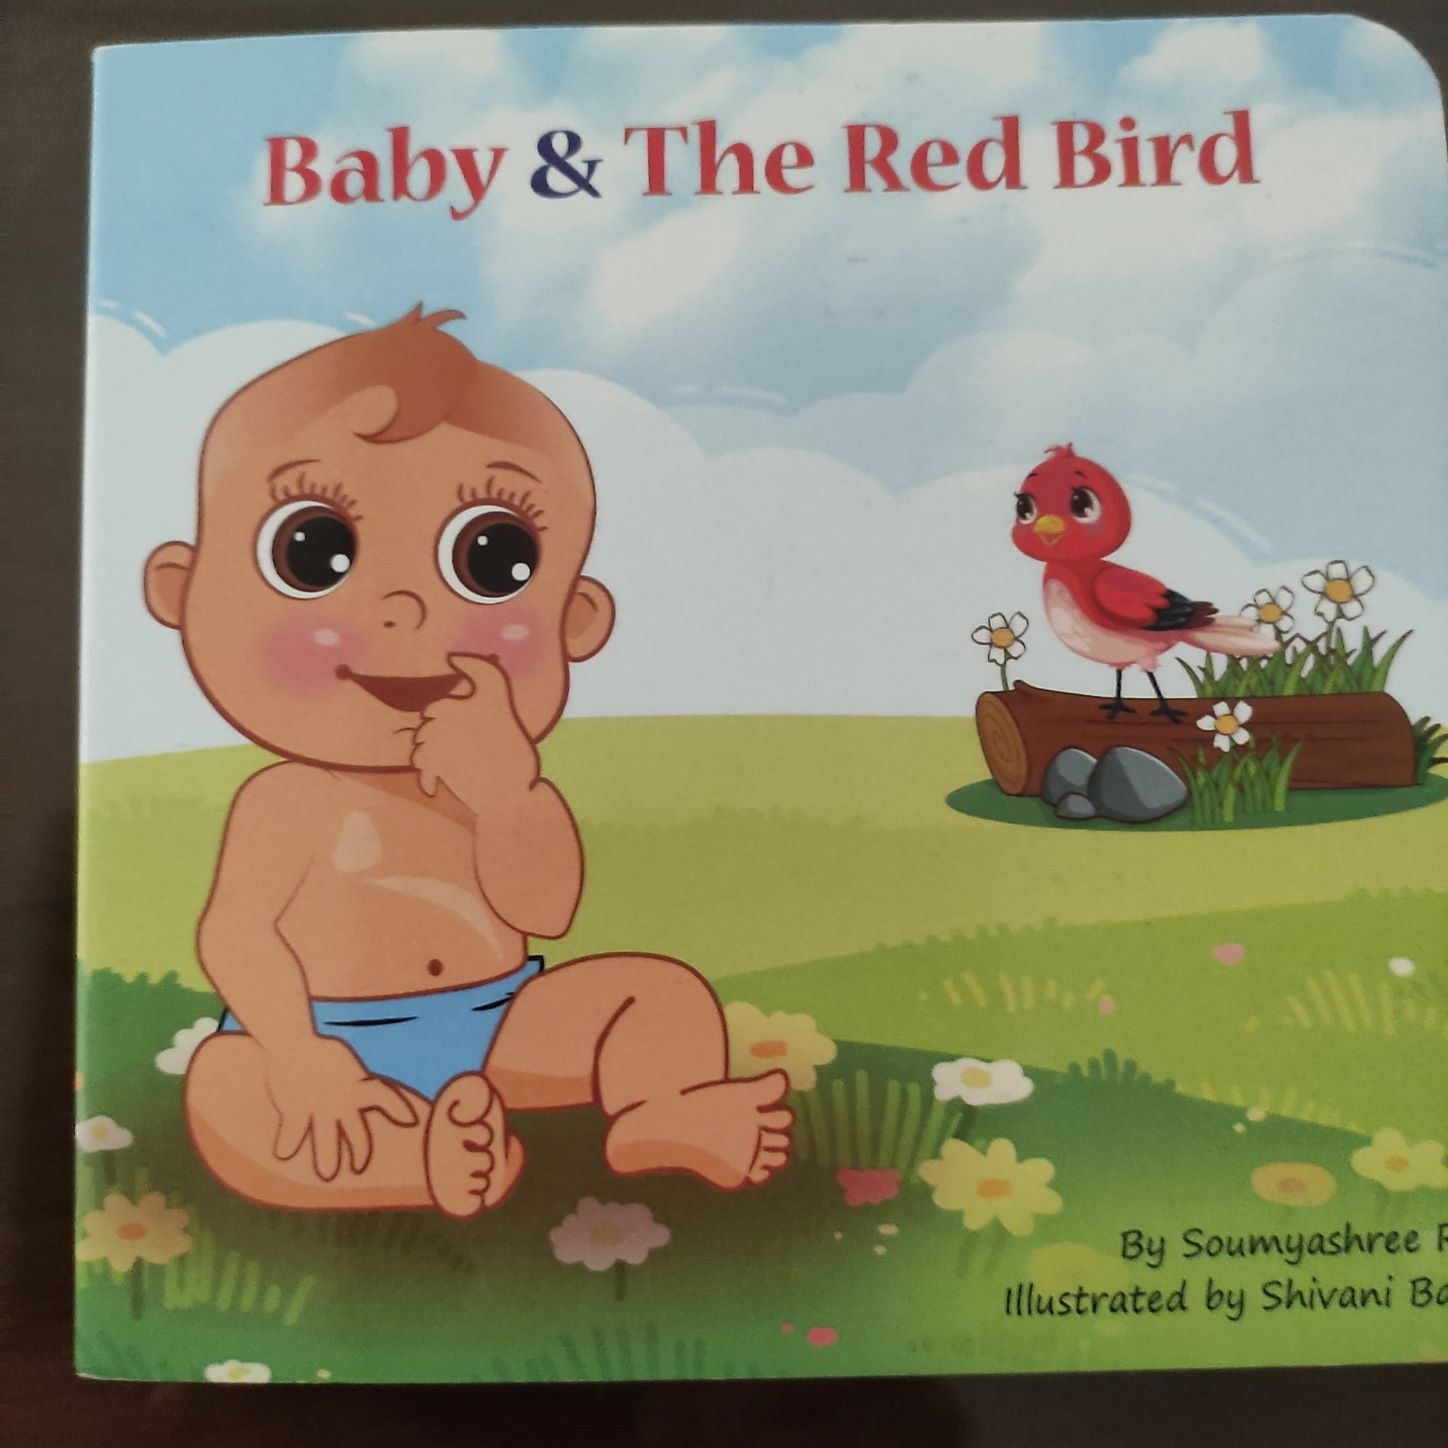 Review: Baby & The Red Bird